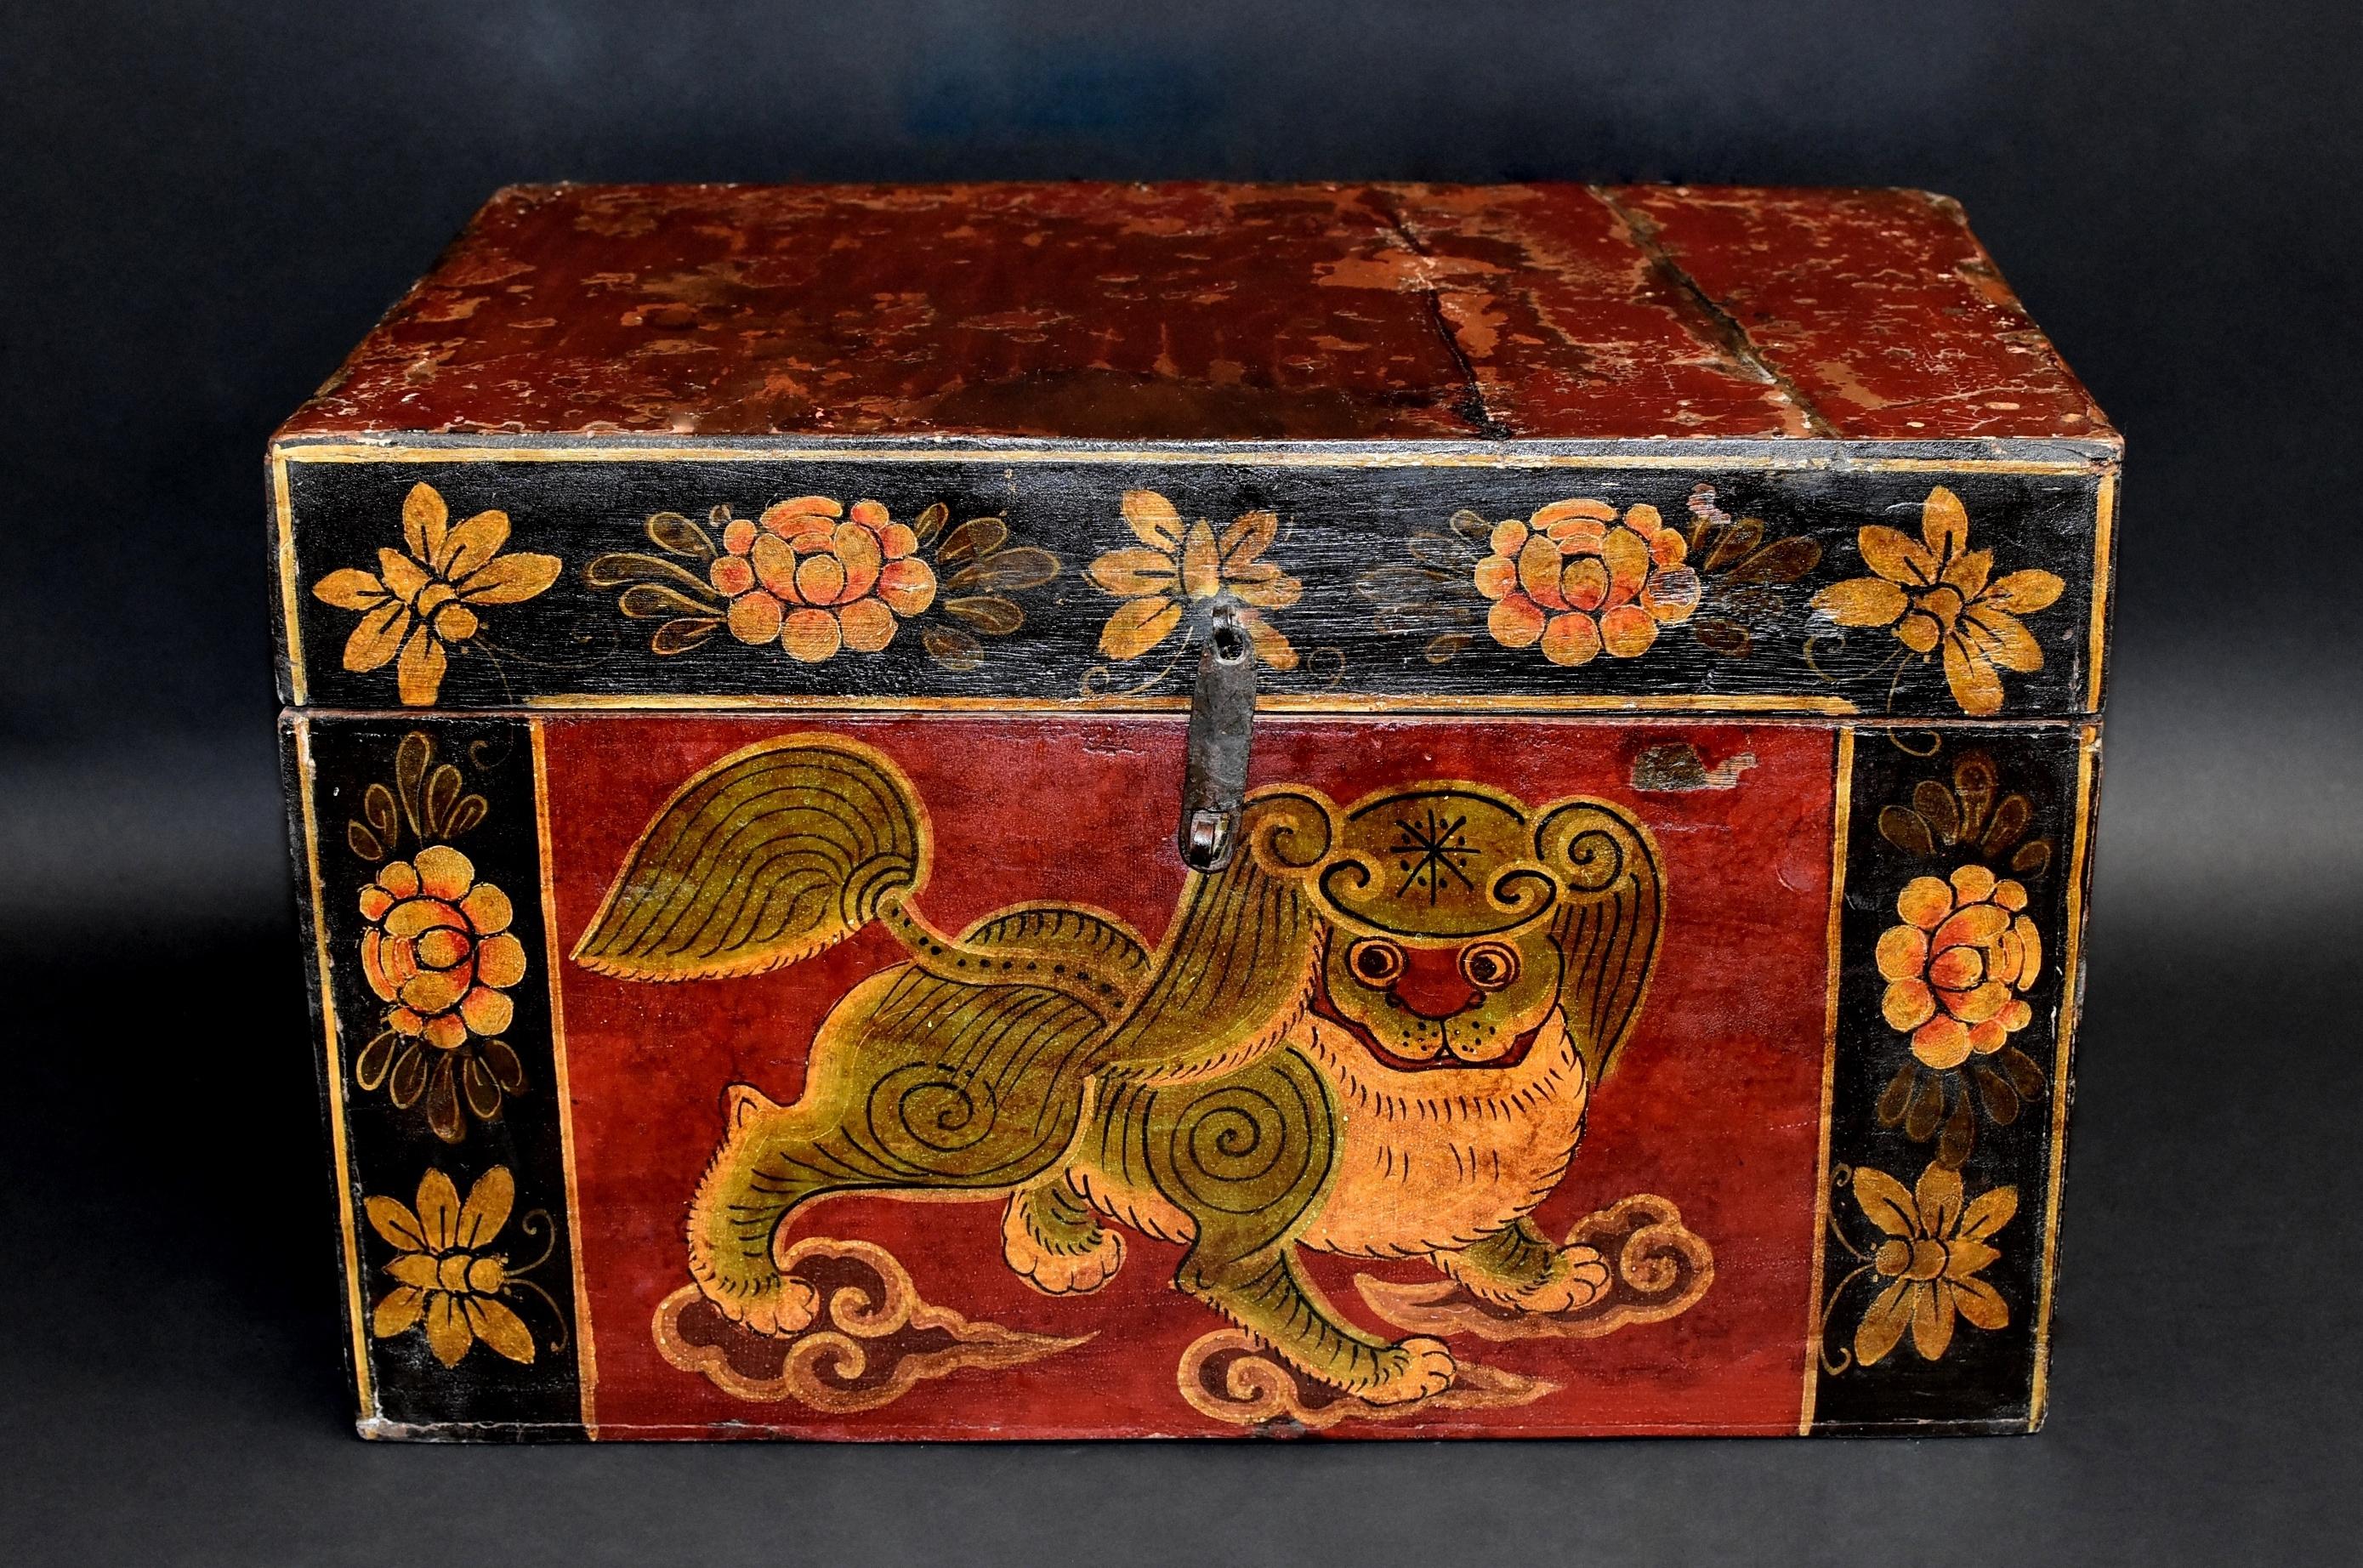 A wonderful, hand painted Tibetan box featuring a beautiful foo dog. The foo dog is of the Pekingese breed with perfect hair and posture. He looks to his right with great curiosity and intent. All four paws on clouds adds a celestial appeal. Border